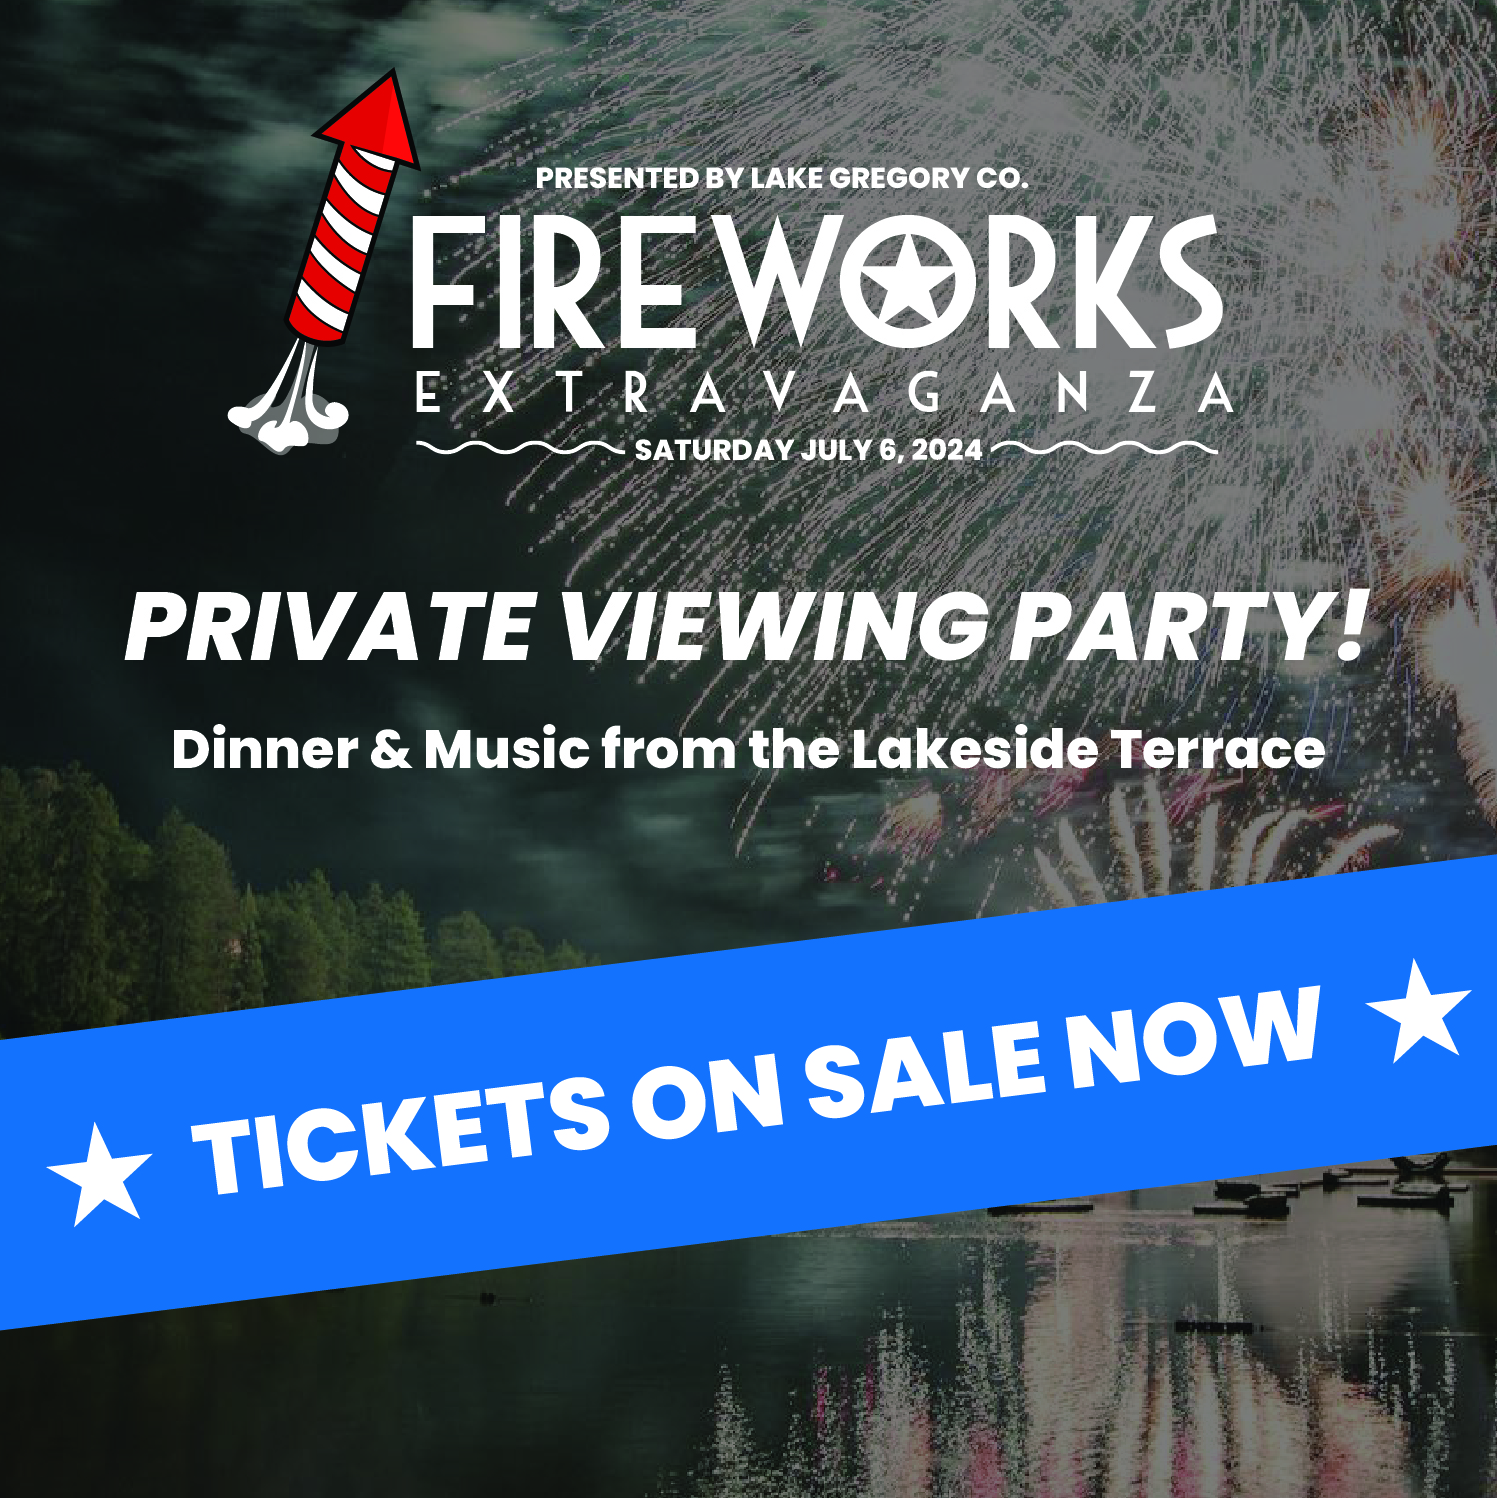 A graphic with fireworks in the background advertising tickets for sale for a private viewing party at Lake Gregory for the Fireworks Extravaganza event on July 6. 